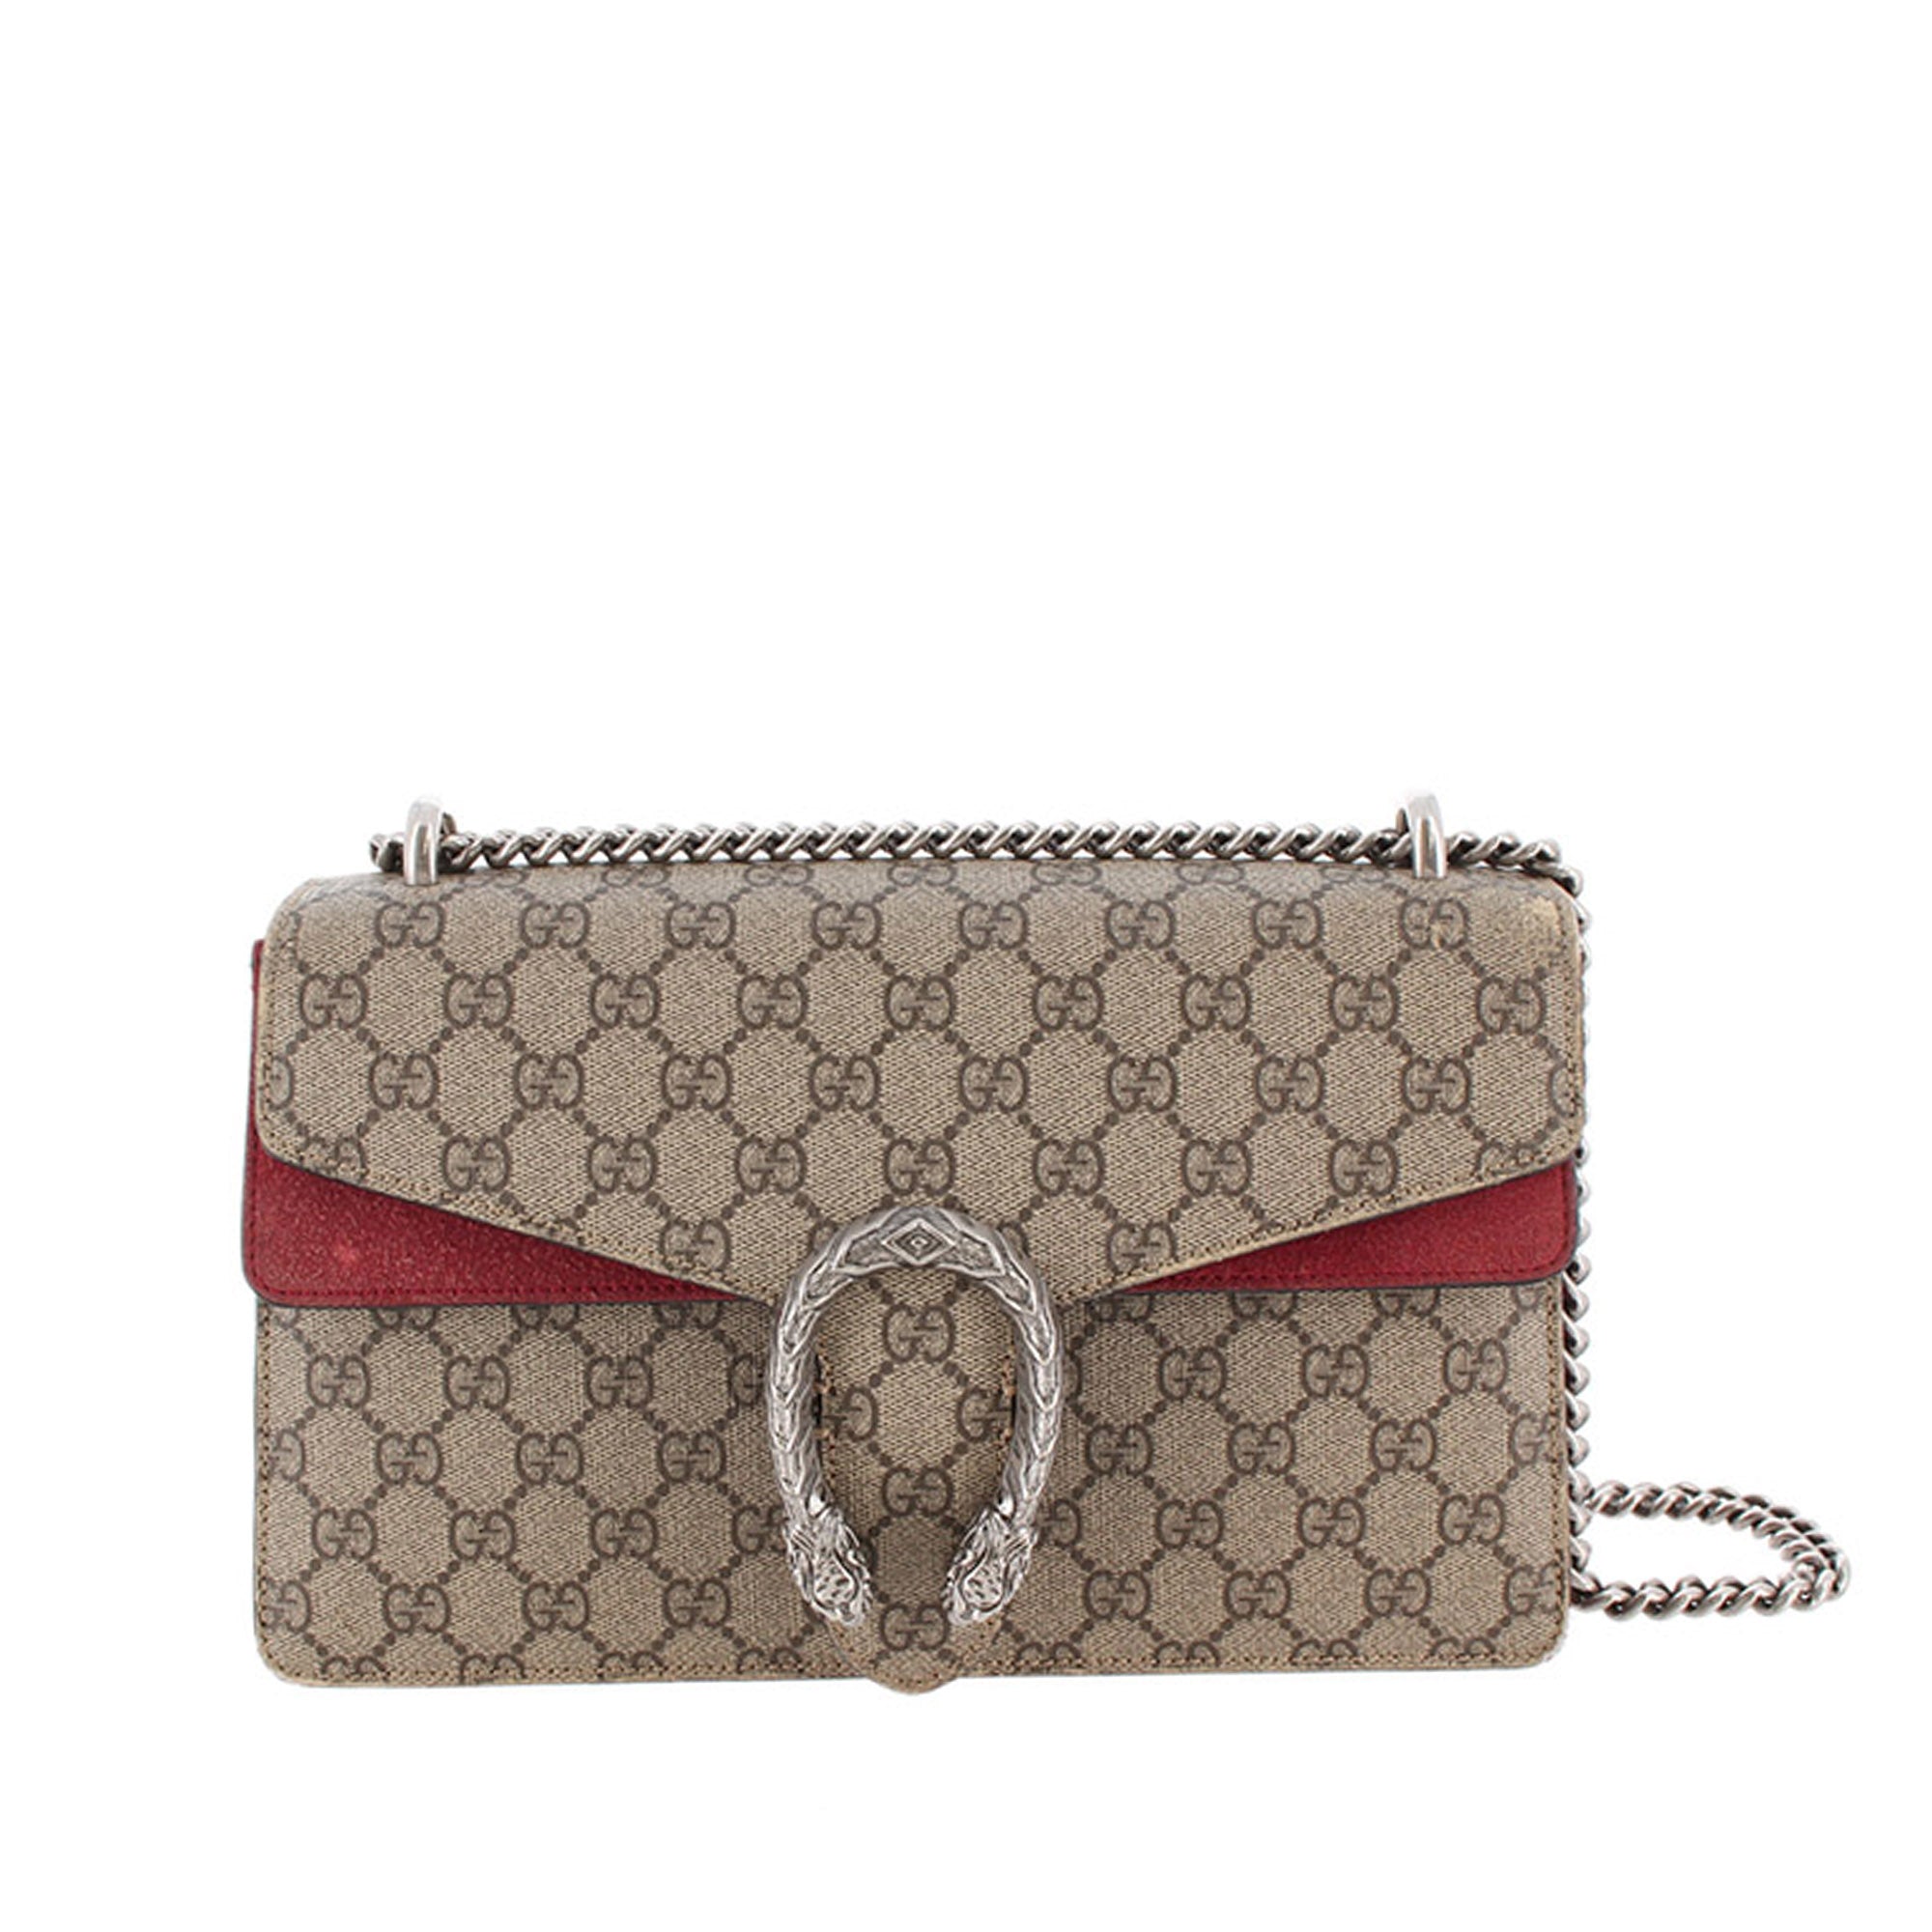 GG Supreme Dionysus Small Shoulder Bag With Red Detail